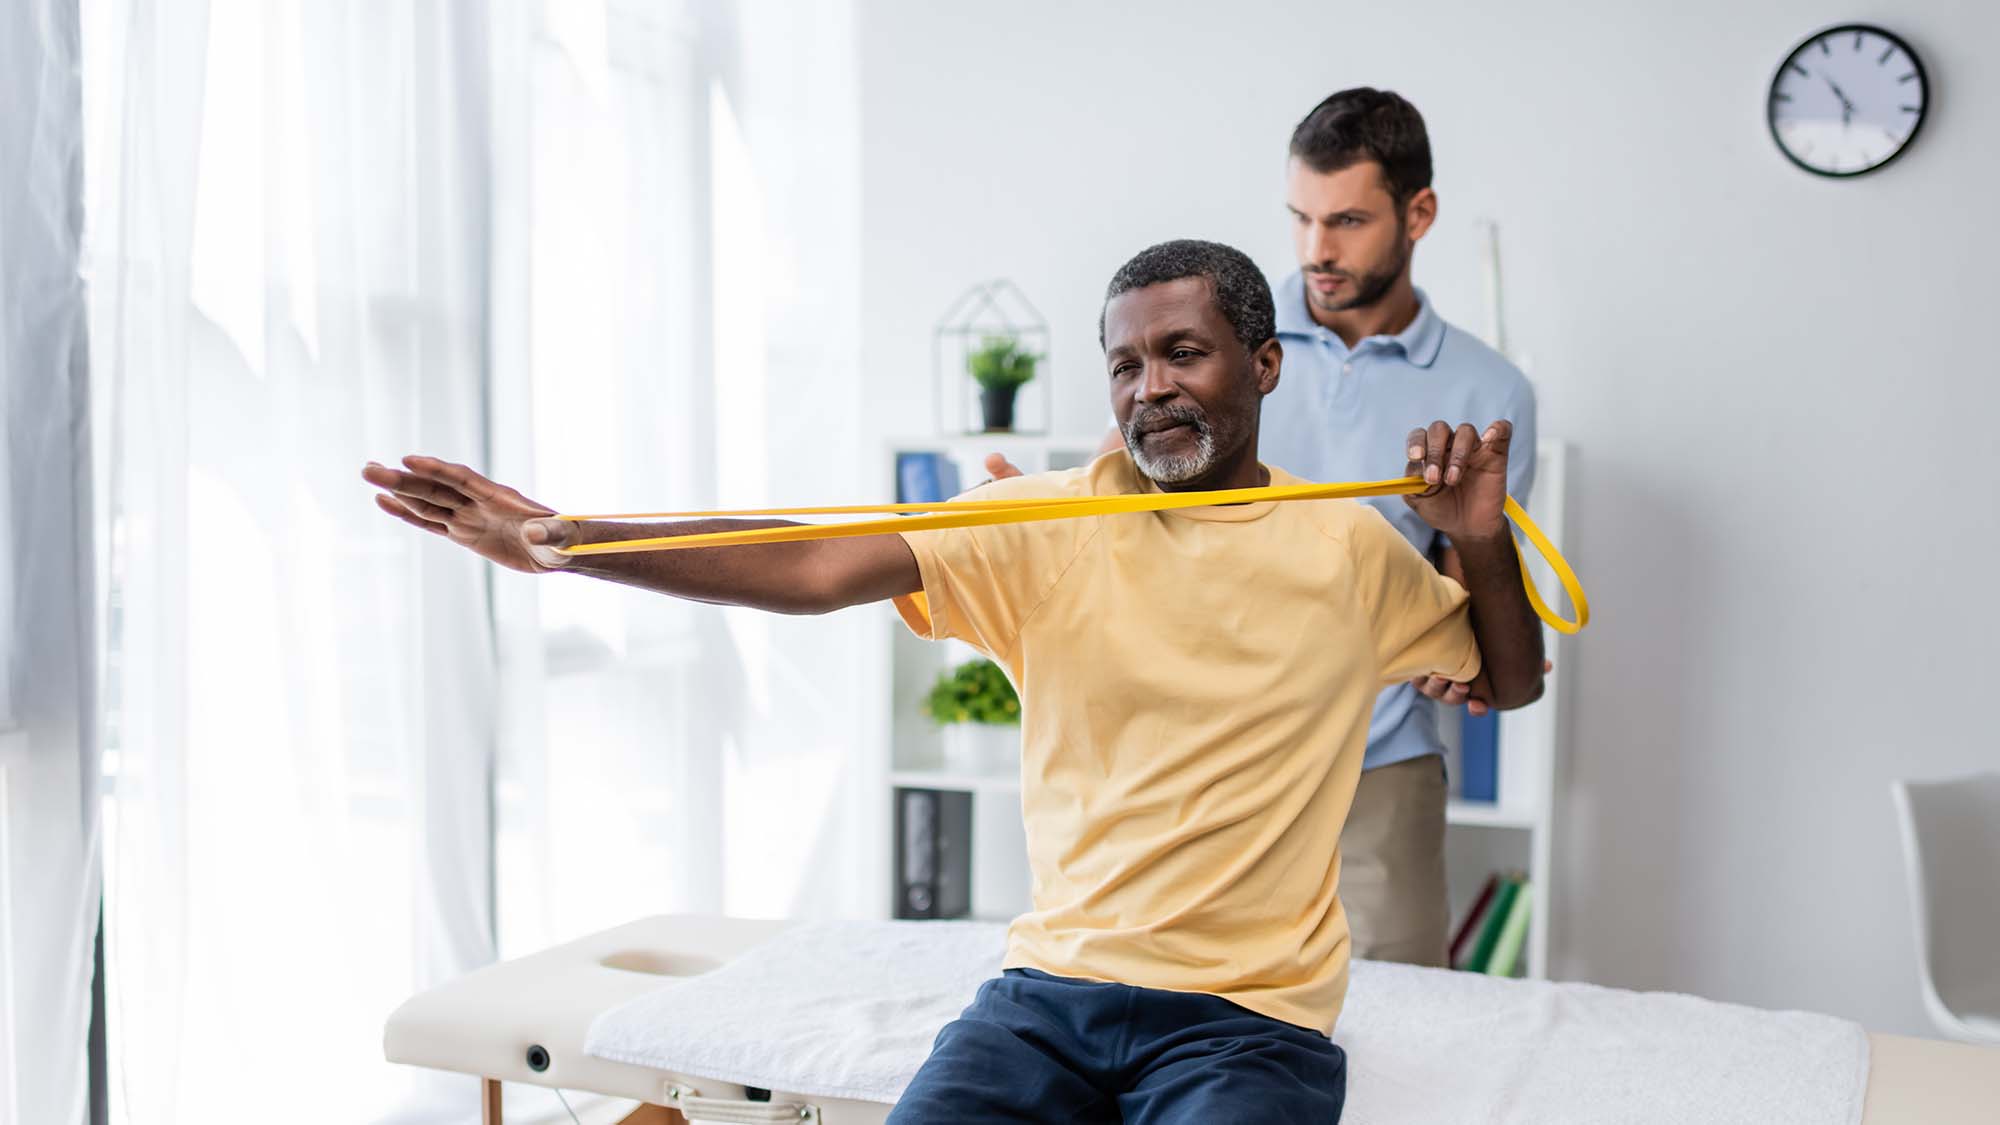 African American man using a rubber exercise band while physical therapist helps.